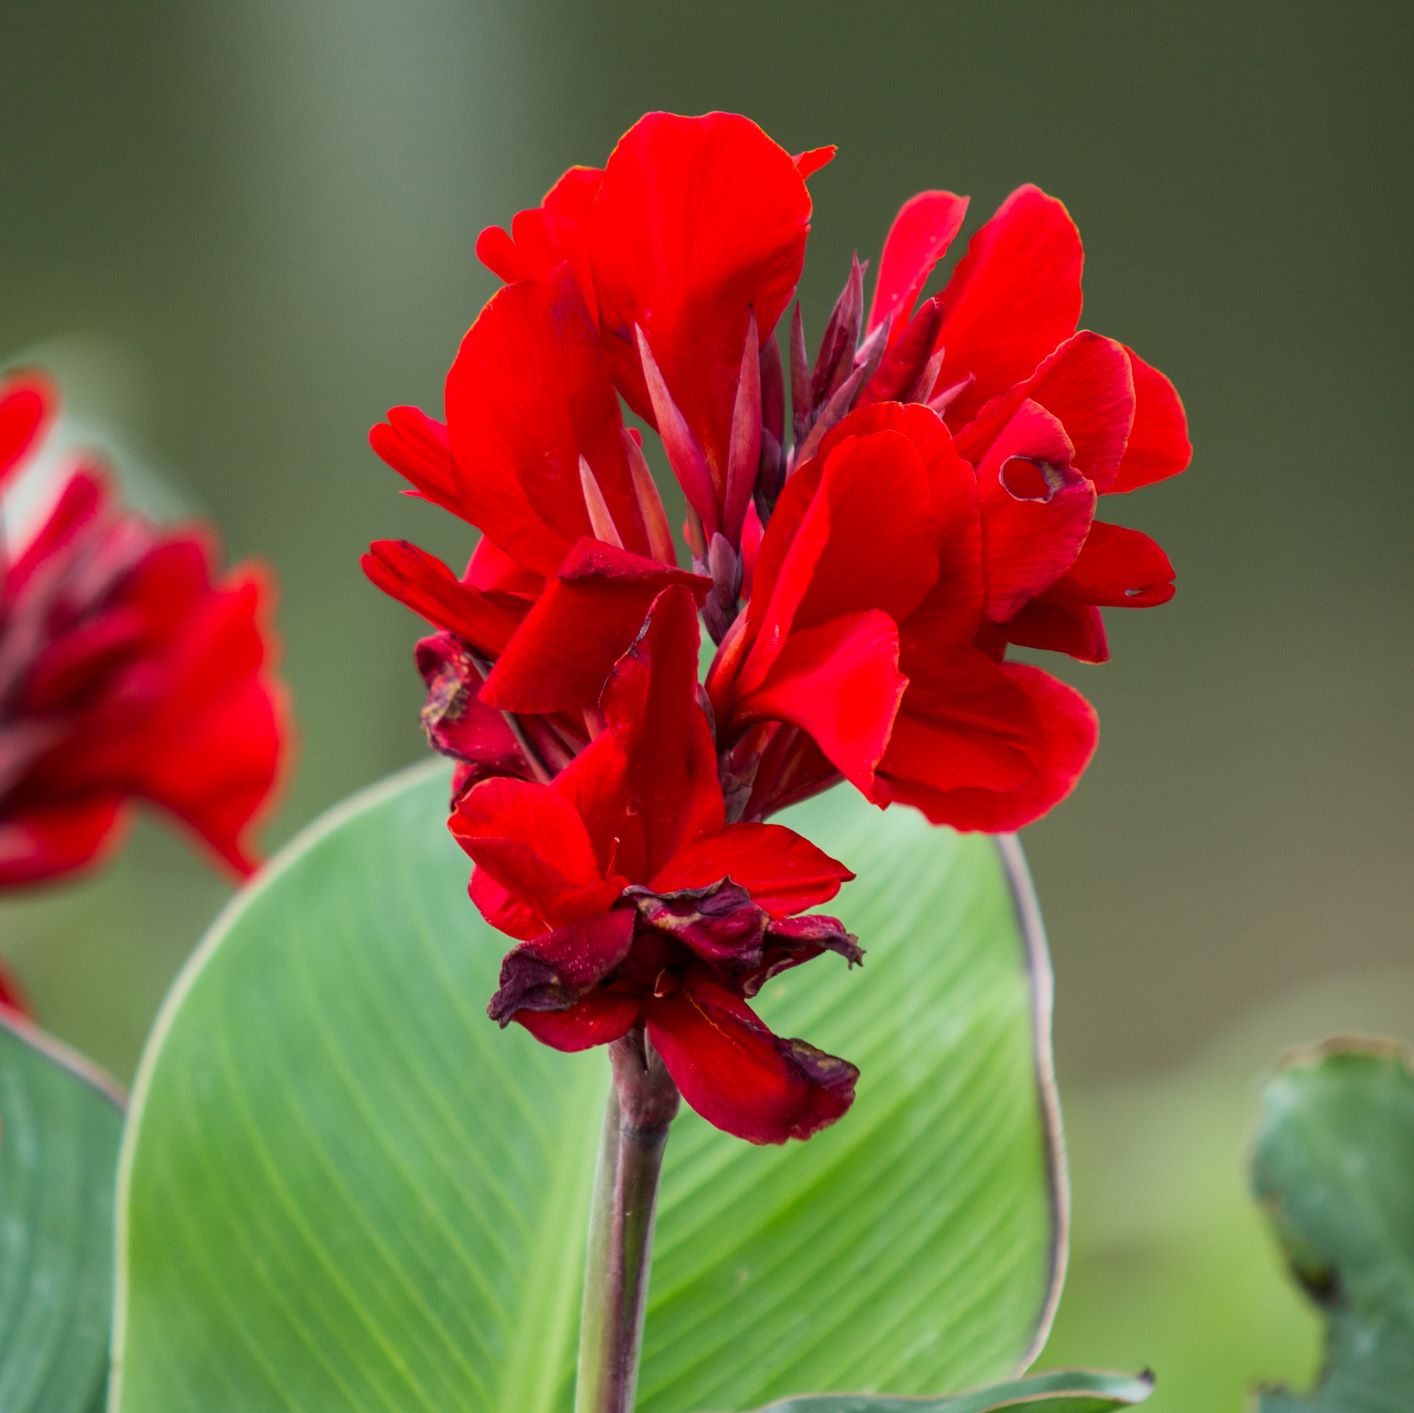 Striking Red Canna Lily Bulbs For Sale Online Fire Dragon Easy To Grow Bulbs